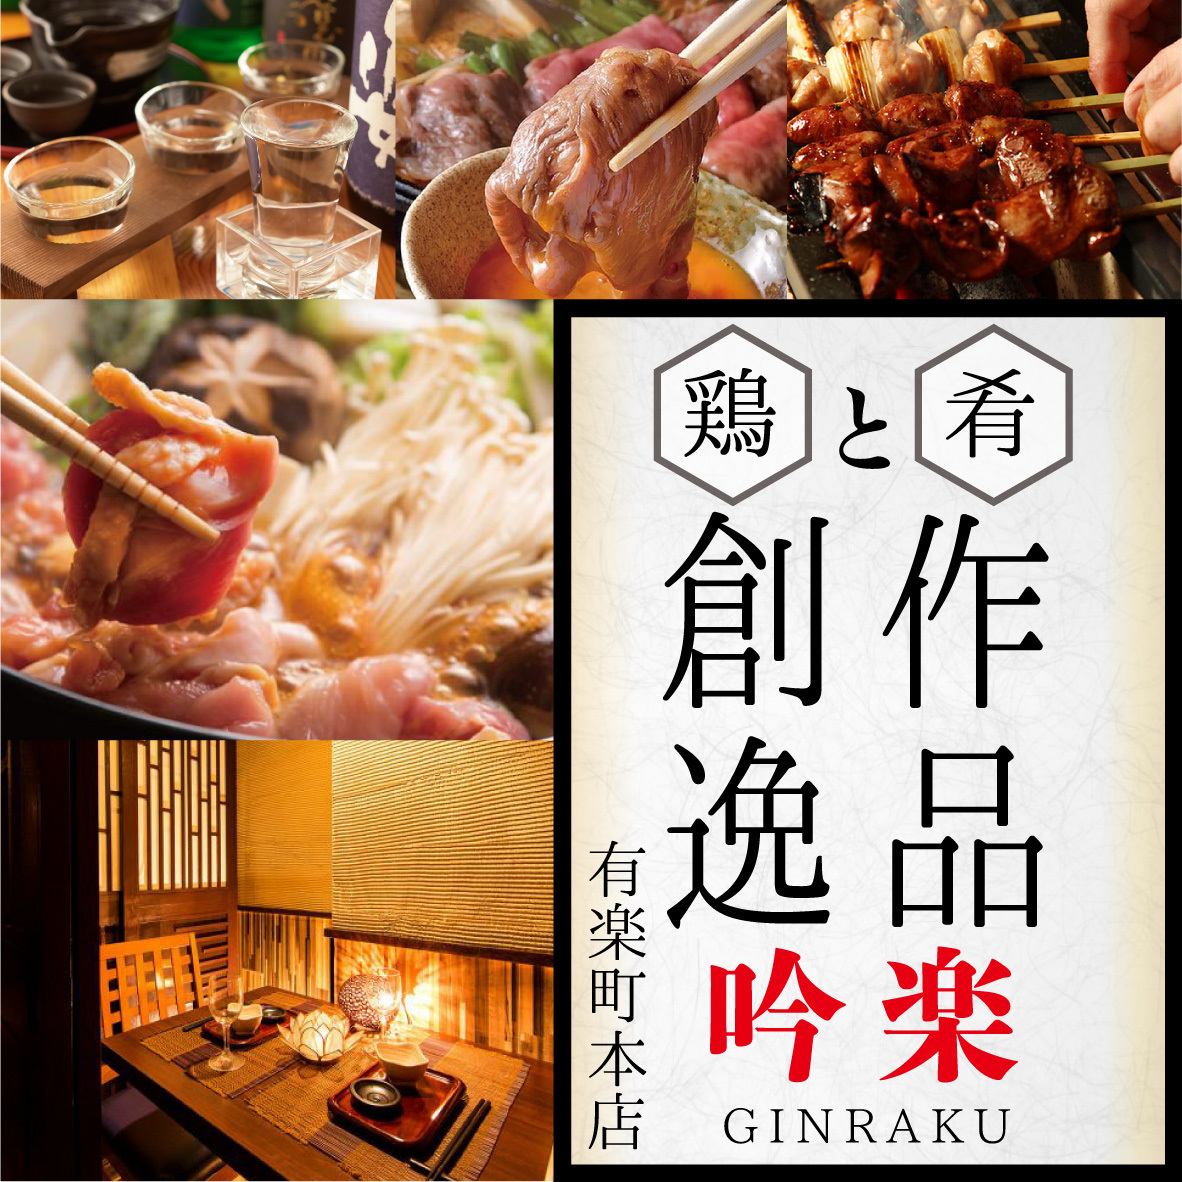 Open until 24:00! Savor fresh Japanese fish and free-range chicken in a completely private room